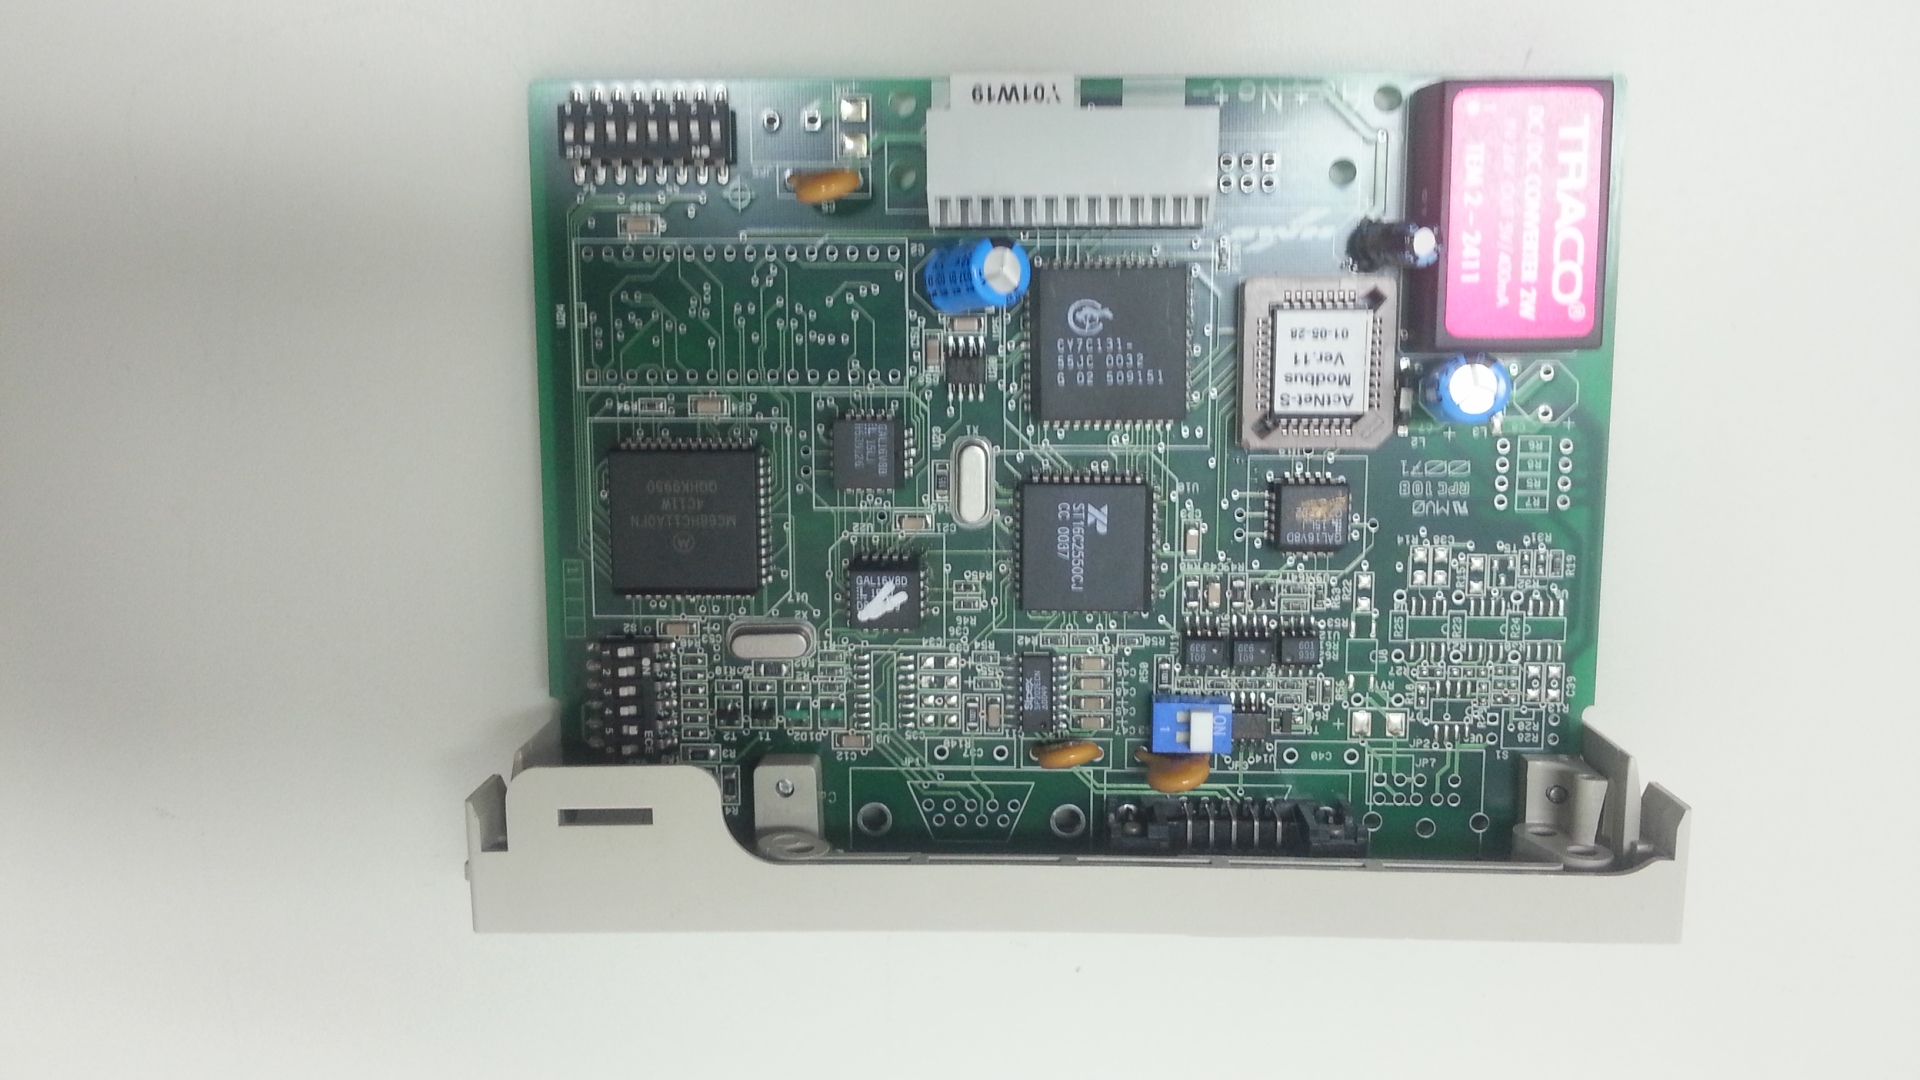 Actnet-S Communication Card Used.